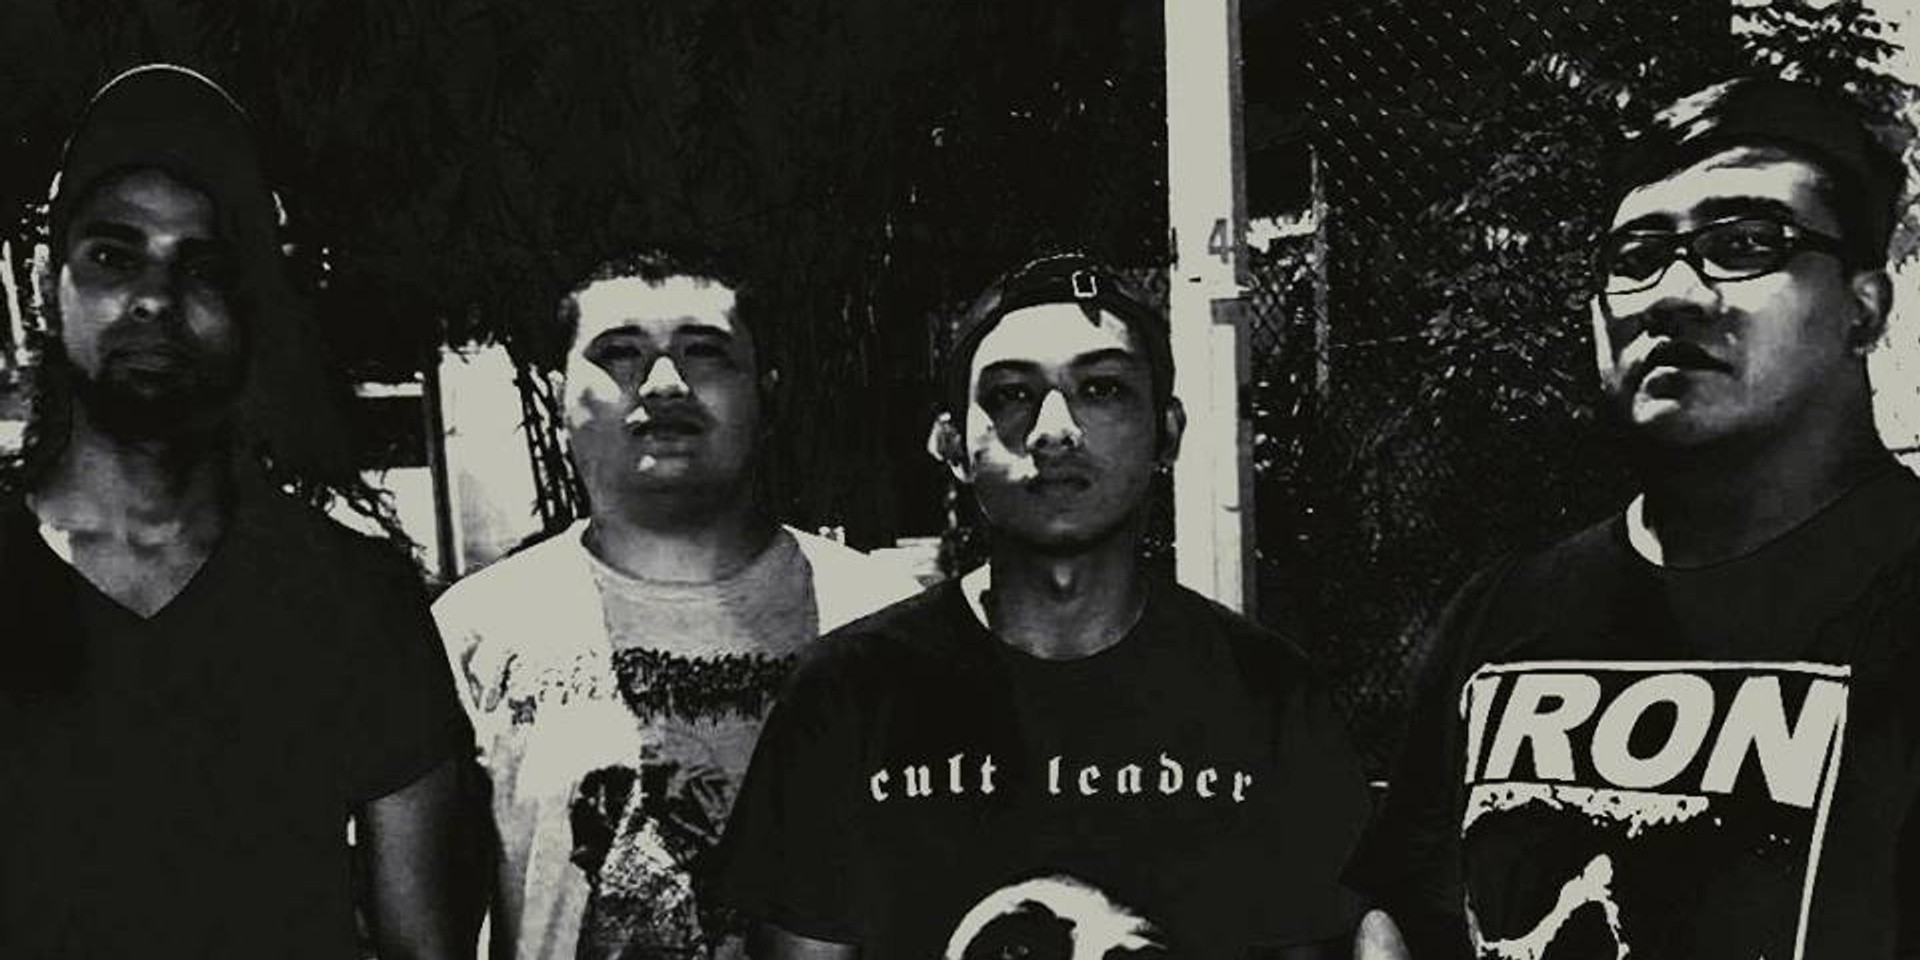 Members of Wormrot and Tools Of The Trade form new side project, Code Error